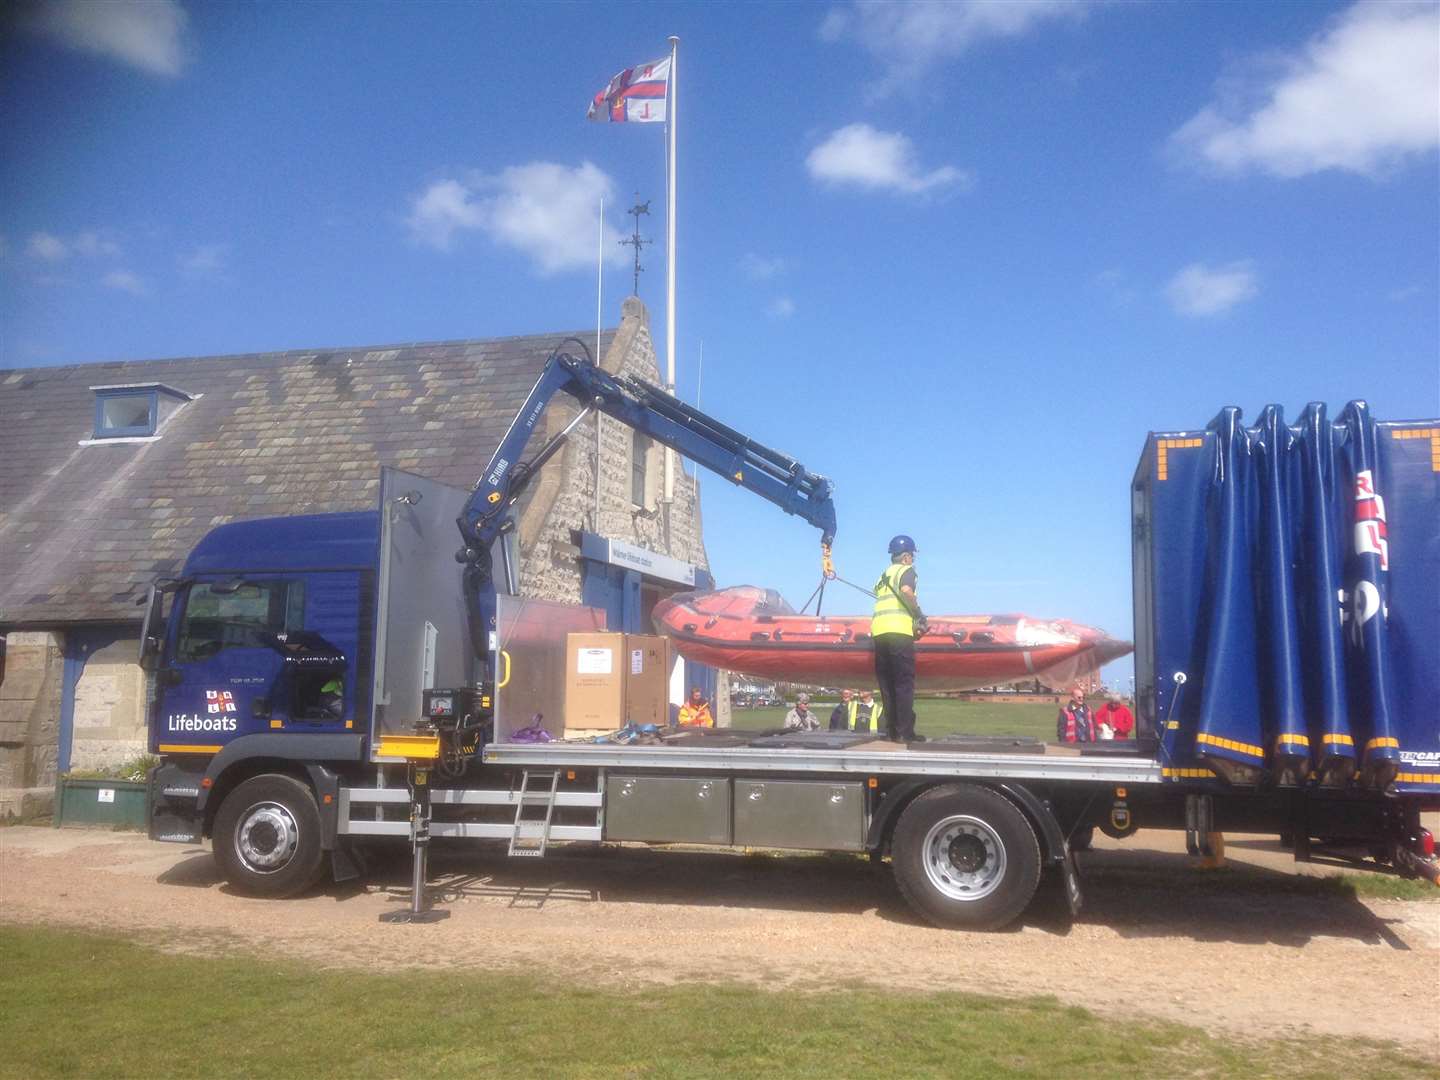 Walmer Lifeboat station has received the delivery of a new lifeboat vessel Duggie Rodbard II